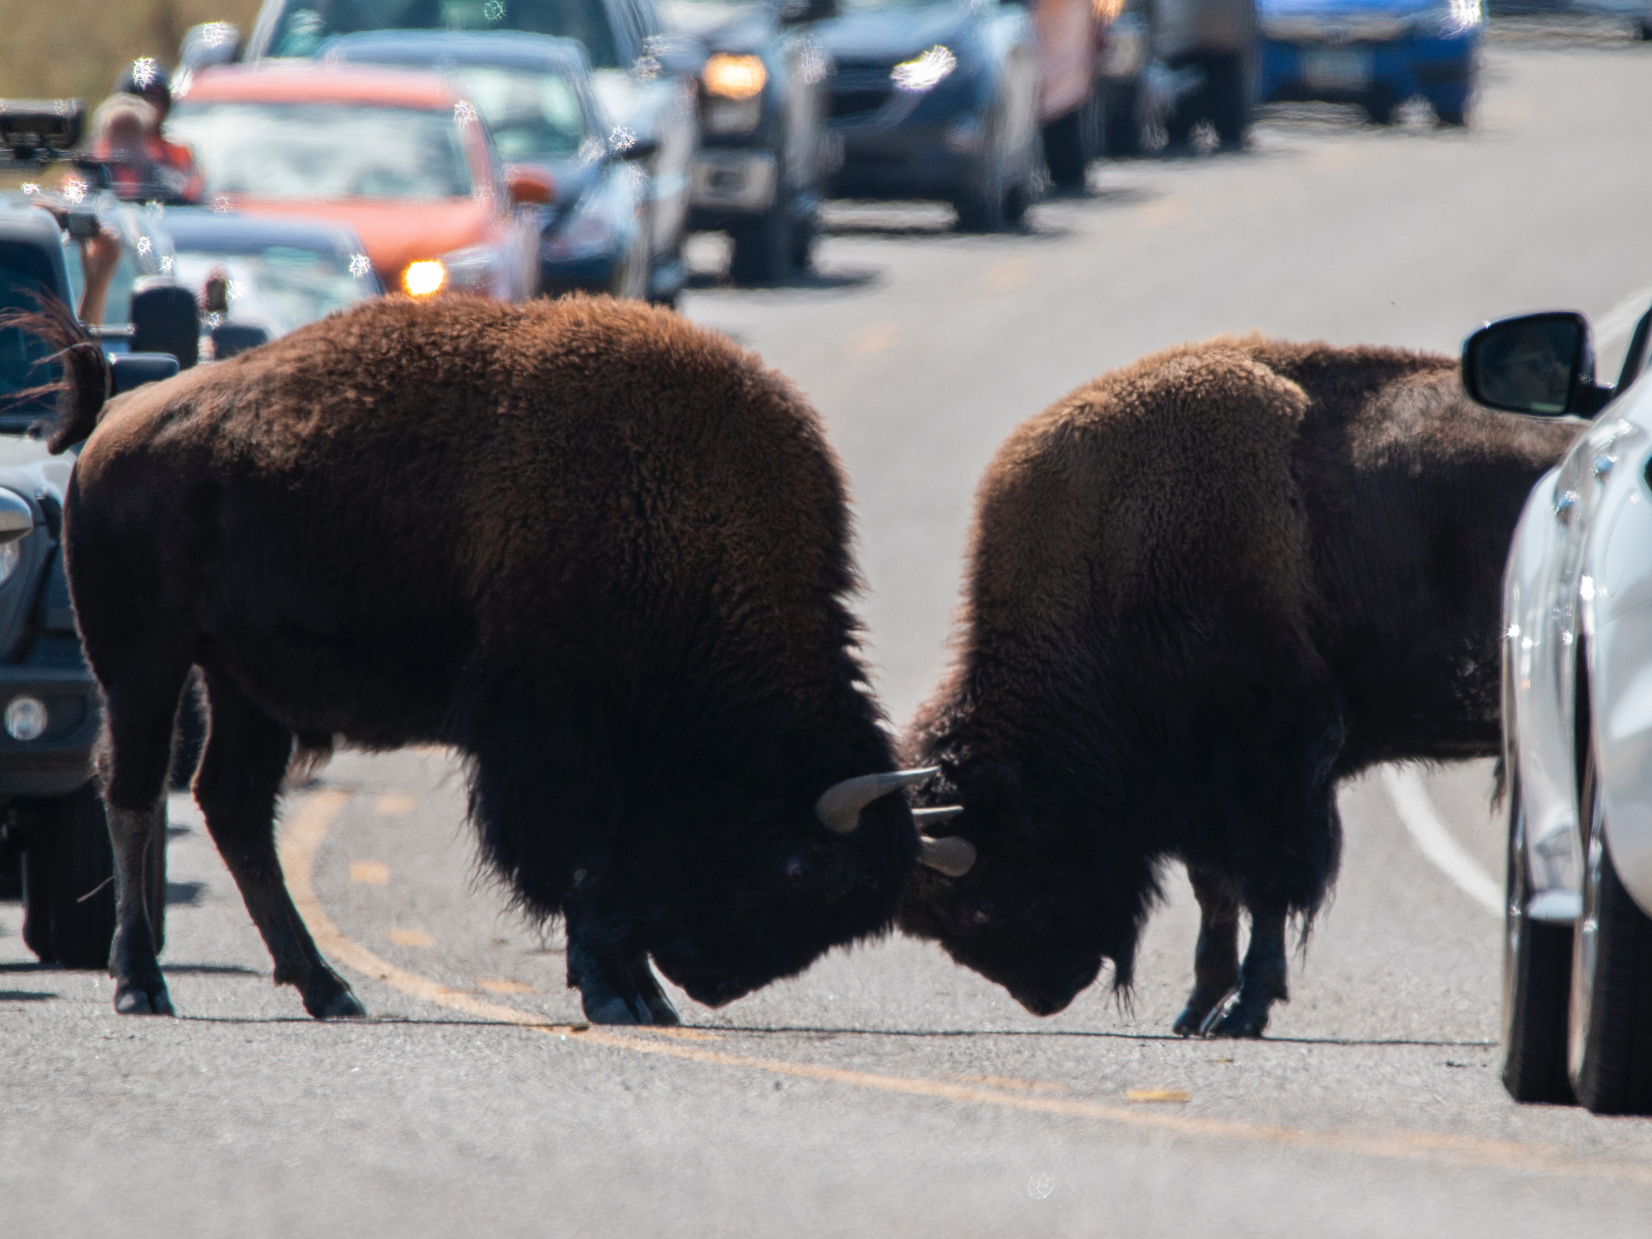 Bison fighting on a roadway while stopping traffic